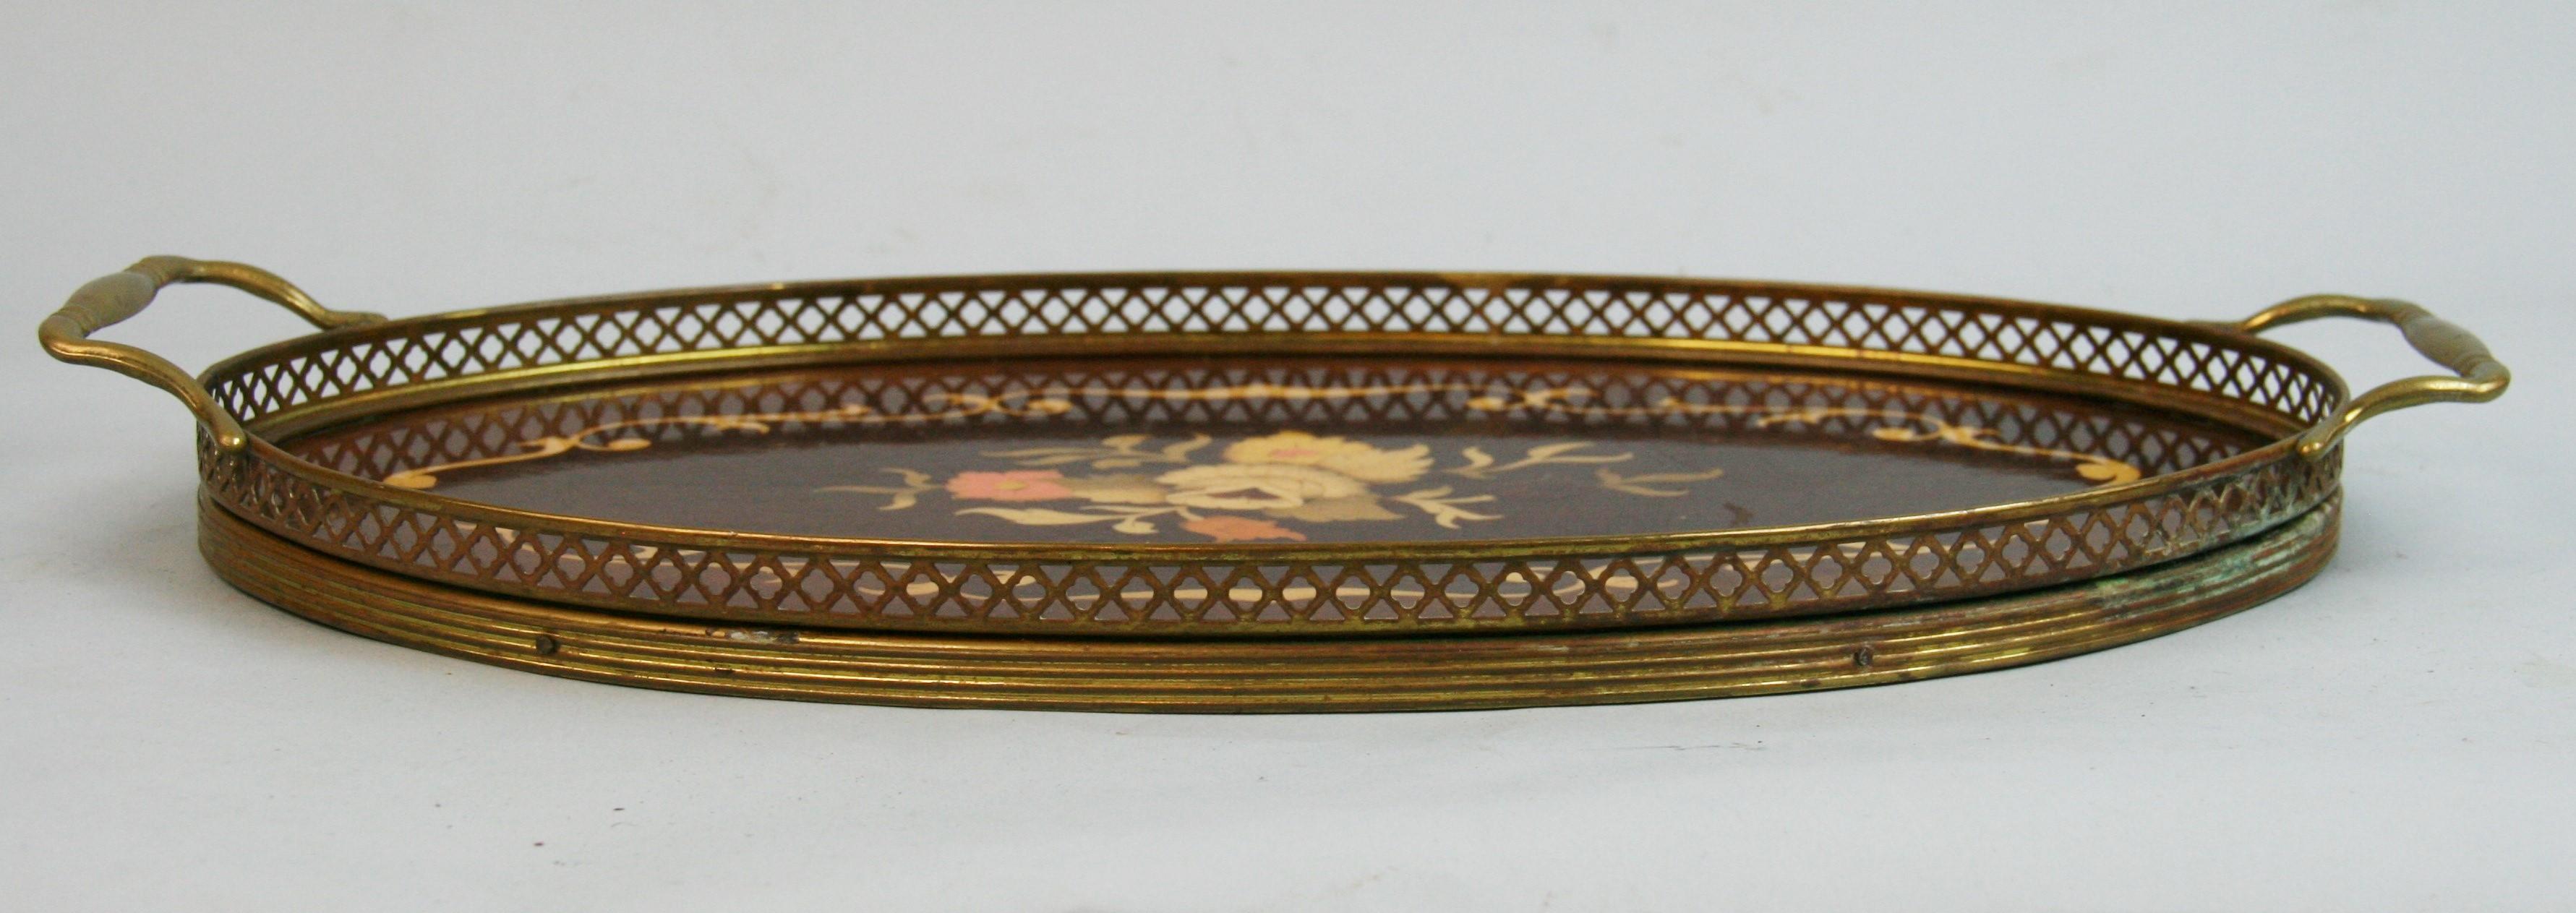 Italian Serving Tray Inlaid Wood Brass Rim and Handles, 1960's For Sale 6